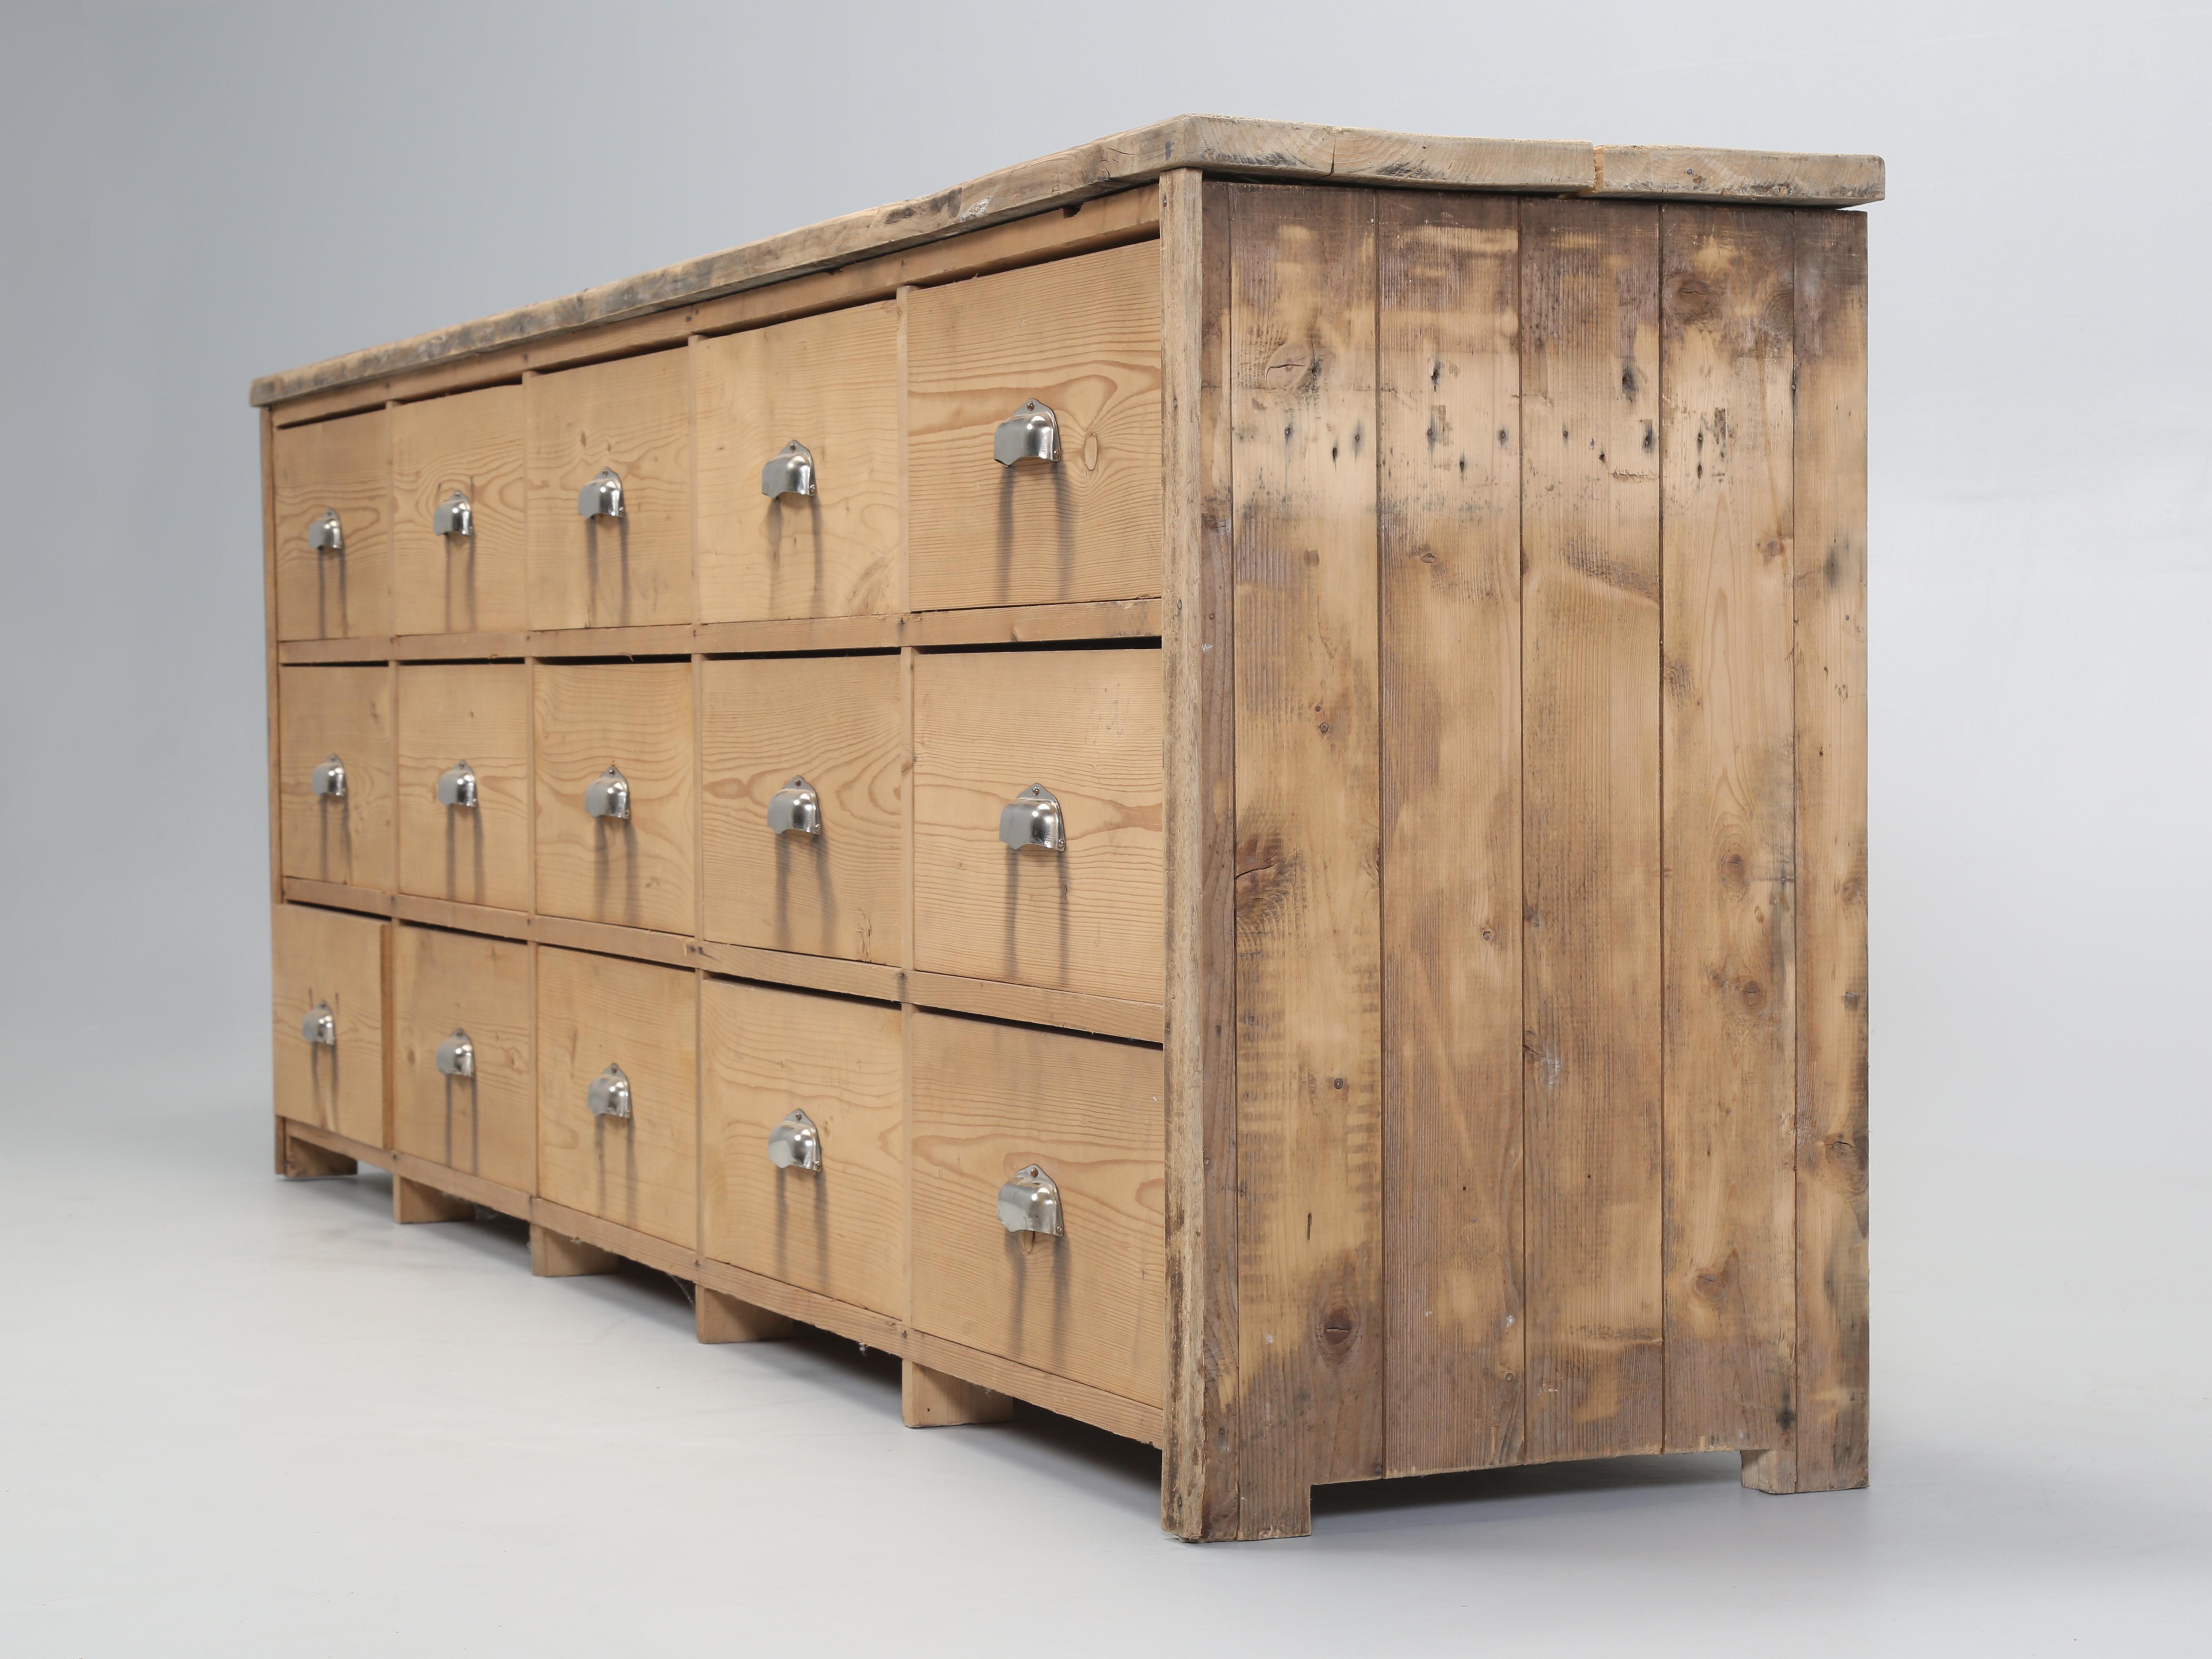 Kitchen Island? Old Irish Store or Shop Cabinet with (15) large individual Drawers. In Ireland and England, they might have called this Old Stripped Pine Cabinet a Shop Fitting, or Bank of Drawers and we might refer to it as a Store Counter, or